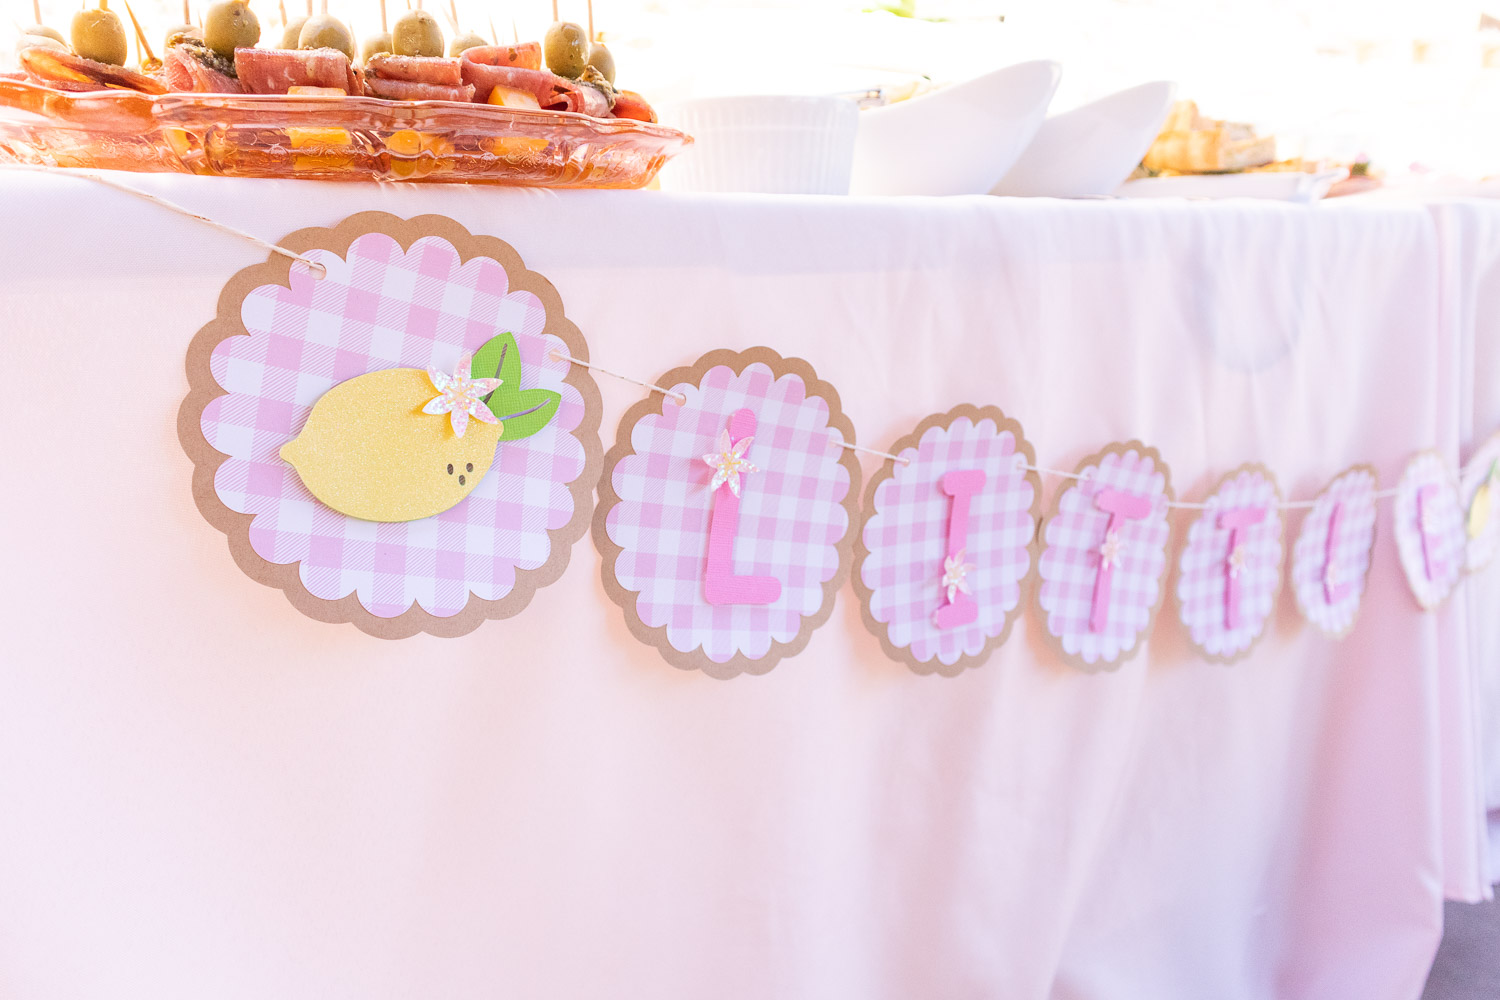 Closeup of lemon baby shower banner made with Cricut. Each pink letter is placed on scalloped gingham circles. The piece on the end has a lemon with a glittery blossom.